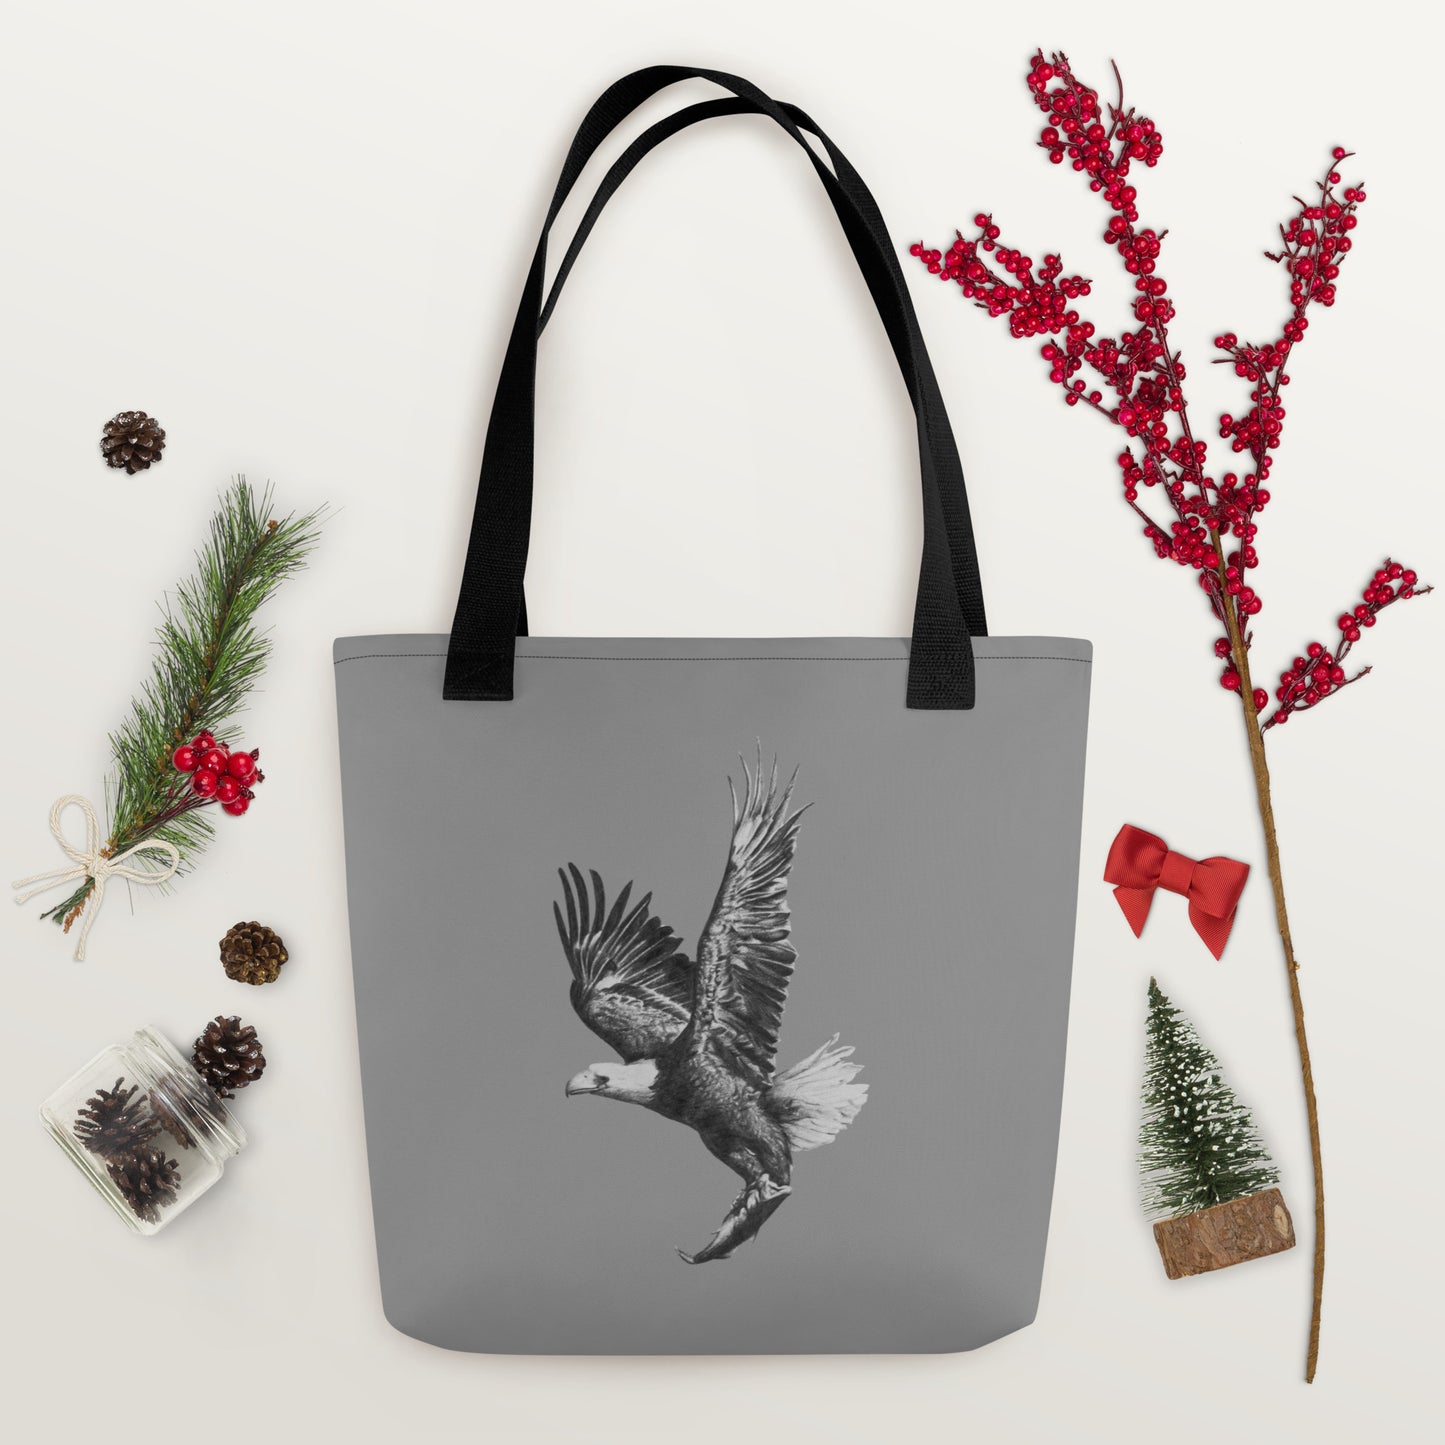 This "Eagle Tote Bag" is from a drawing of mine created with a graphite pencil. It has been digitally optimized and transferred to a 100% spun polyester fabric.